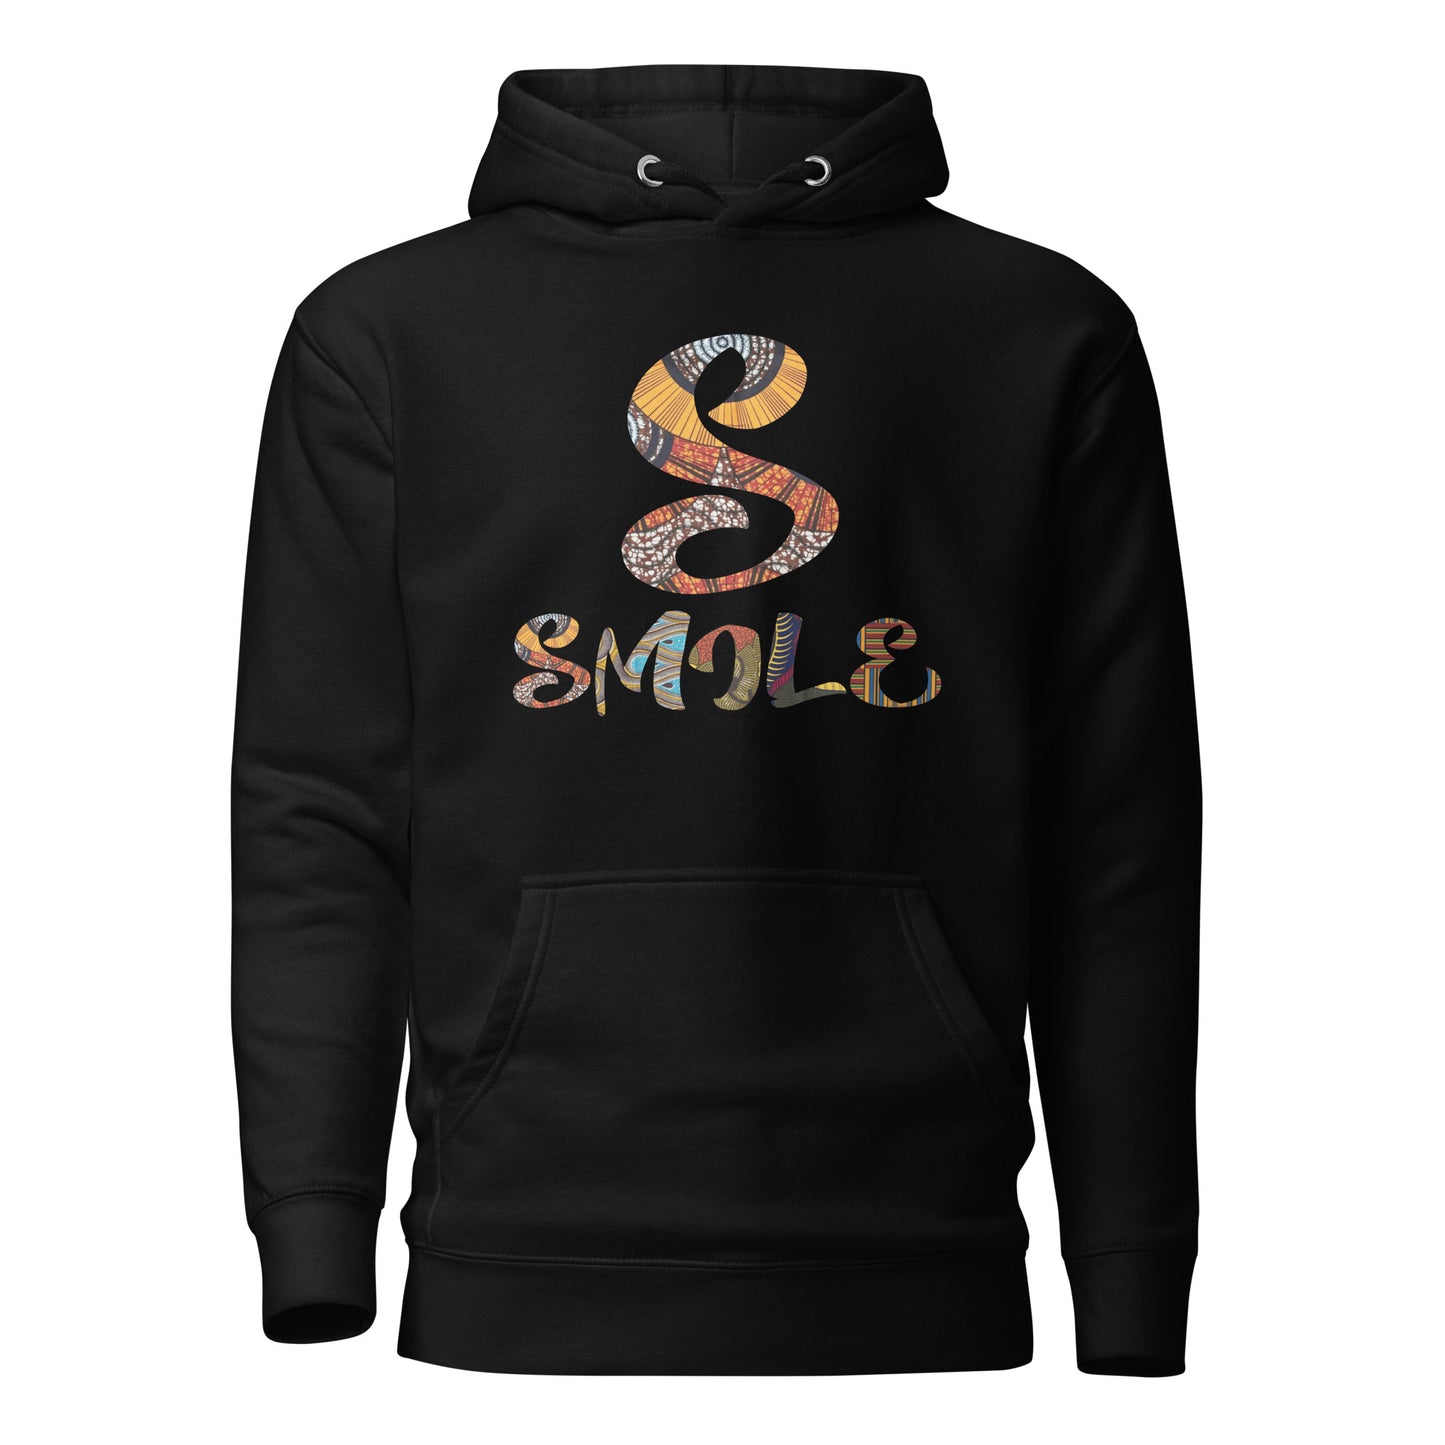 S For Smile Unisex Afro Graphic Hoodie